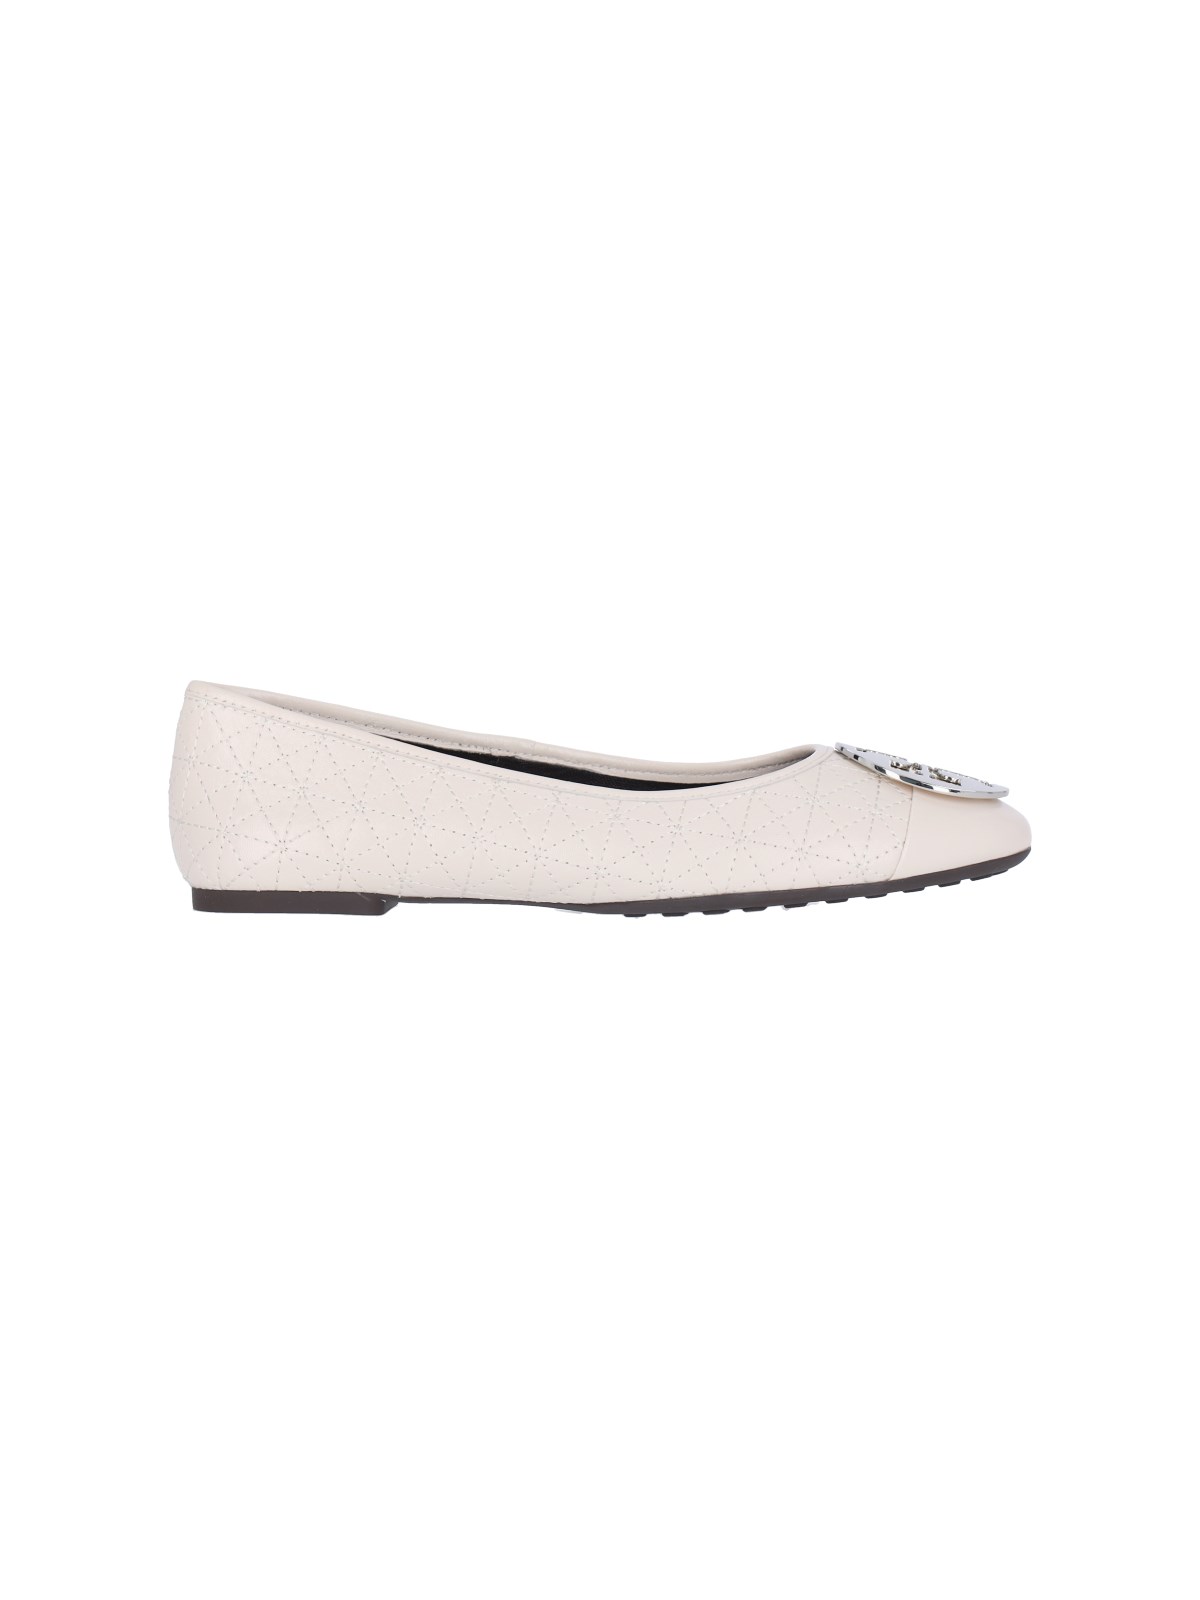 Shop Tory Burch "claire" Ballet Flats In Cream